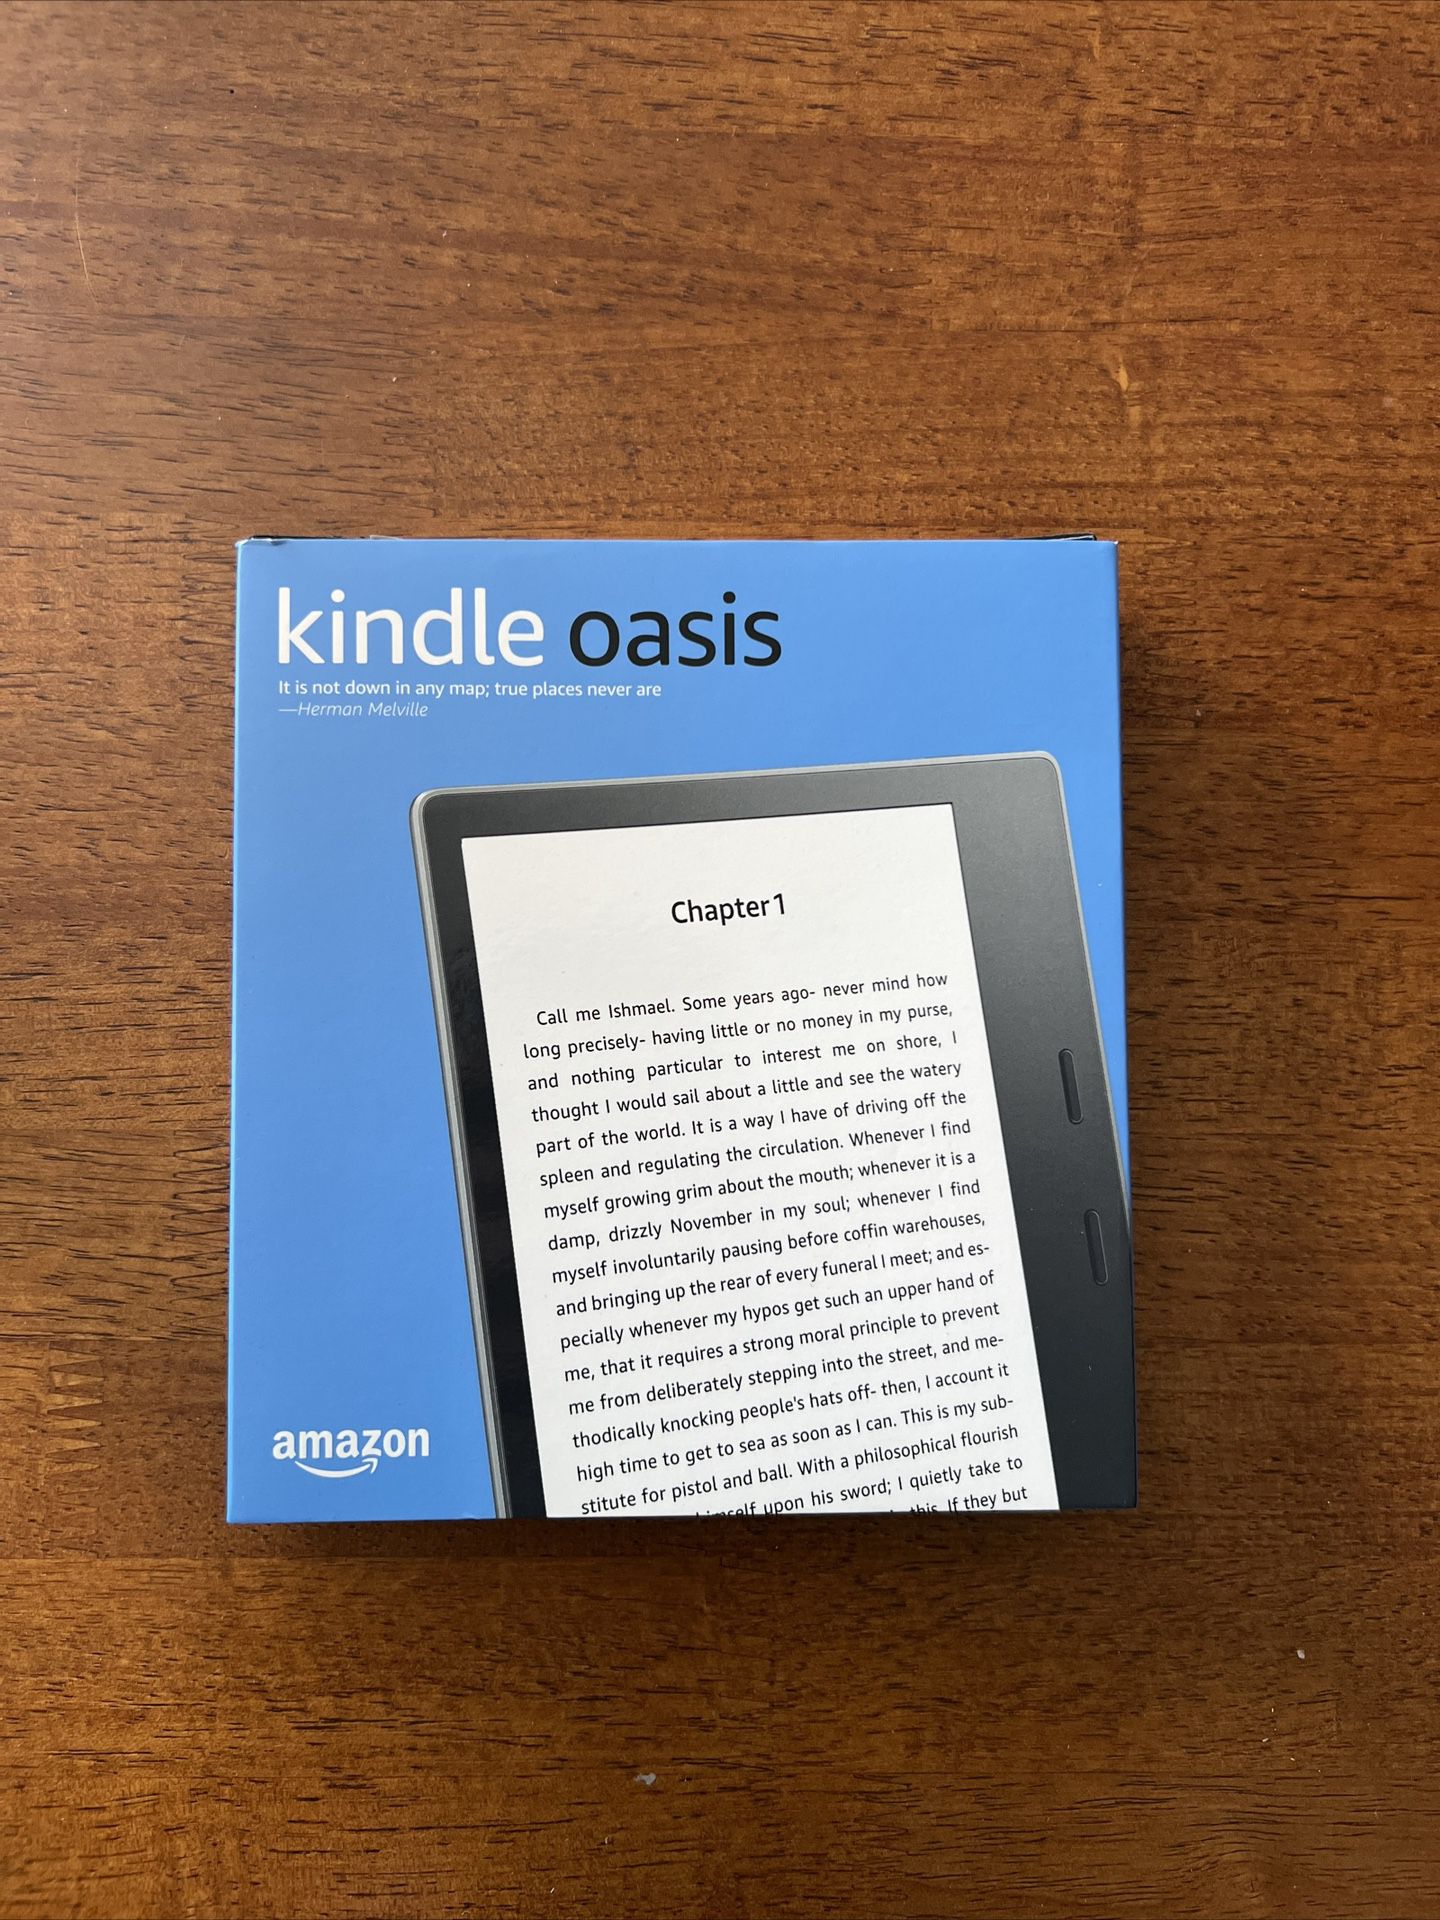 Amazon Kindle Oasis (9th Generation) 32GB, Wi-Fi, 7in - Graphite with Amazon